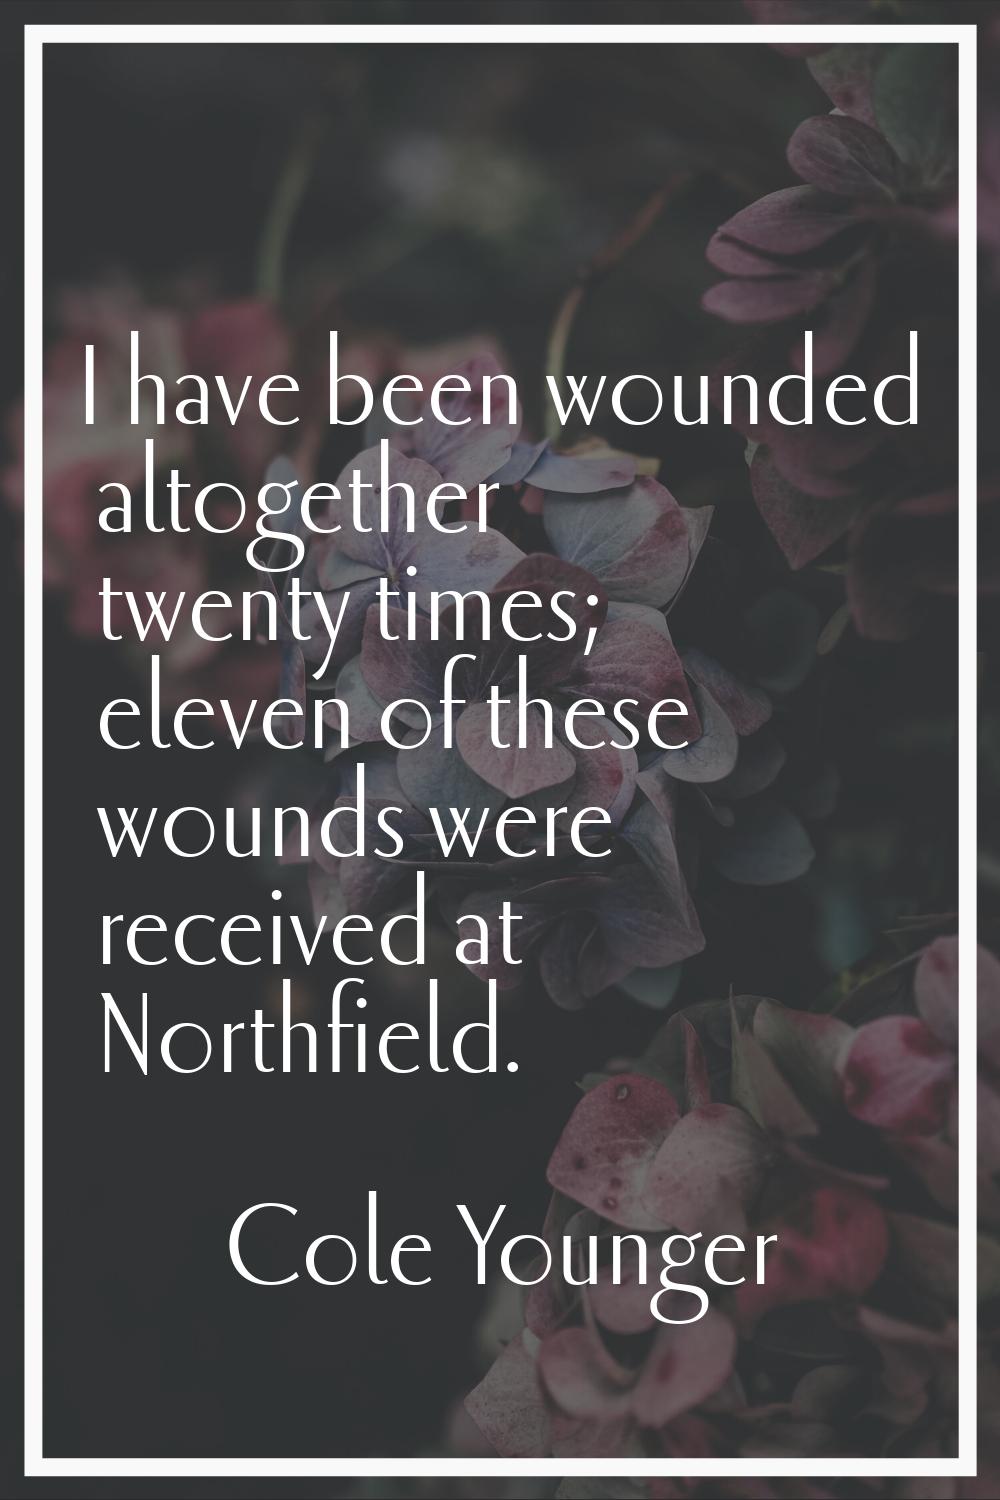 I have been wounded altogether twenty times; eleven of these wounds were received at Northfield.